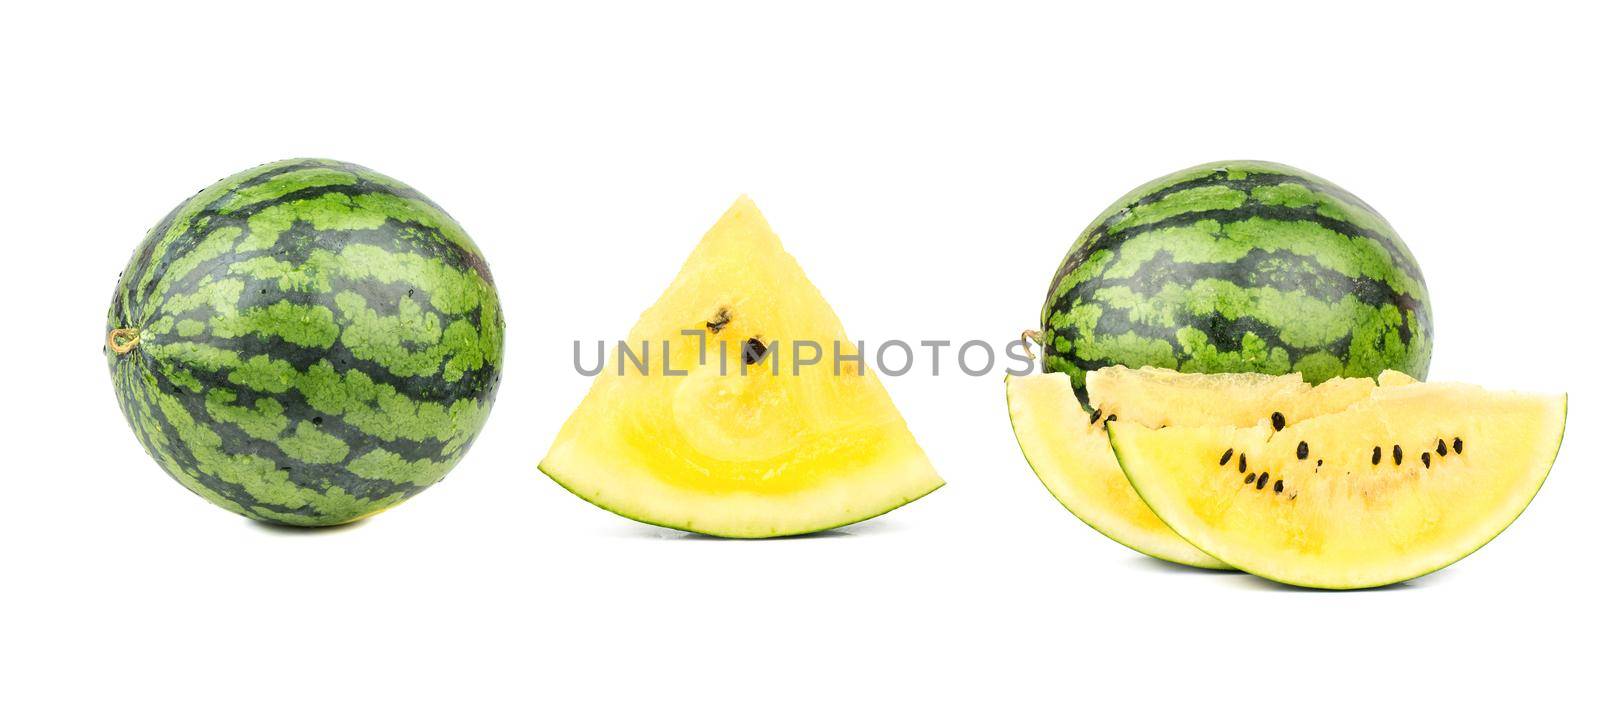 Yellow watermelon with half and slices isolate on white background. Set